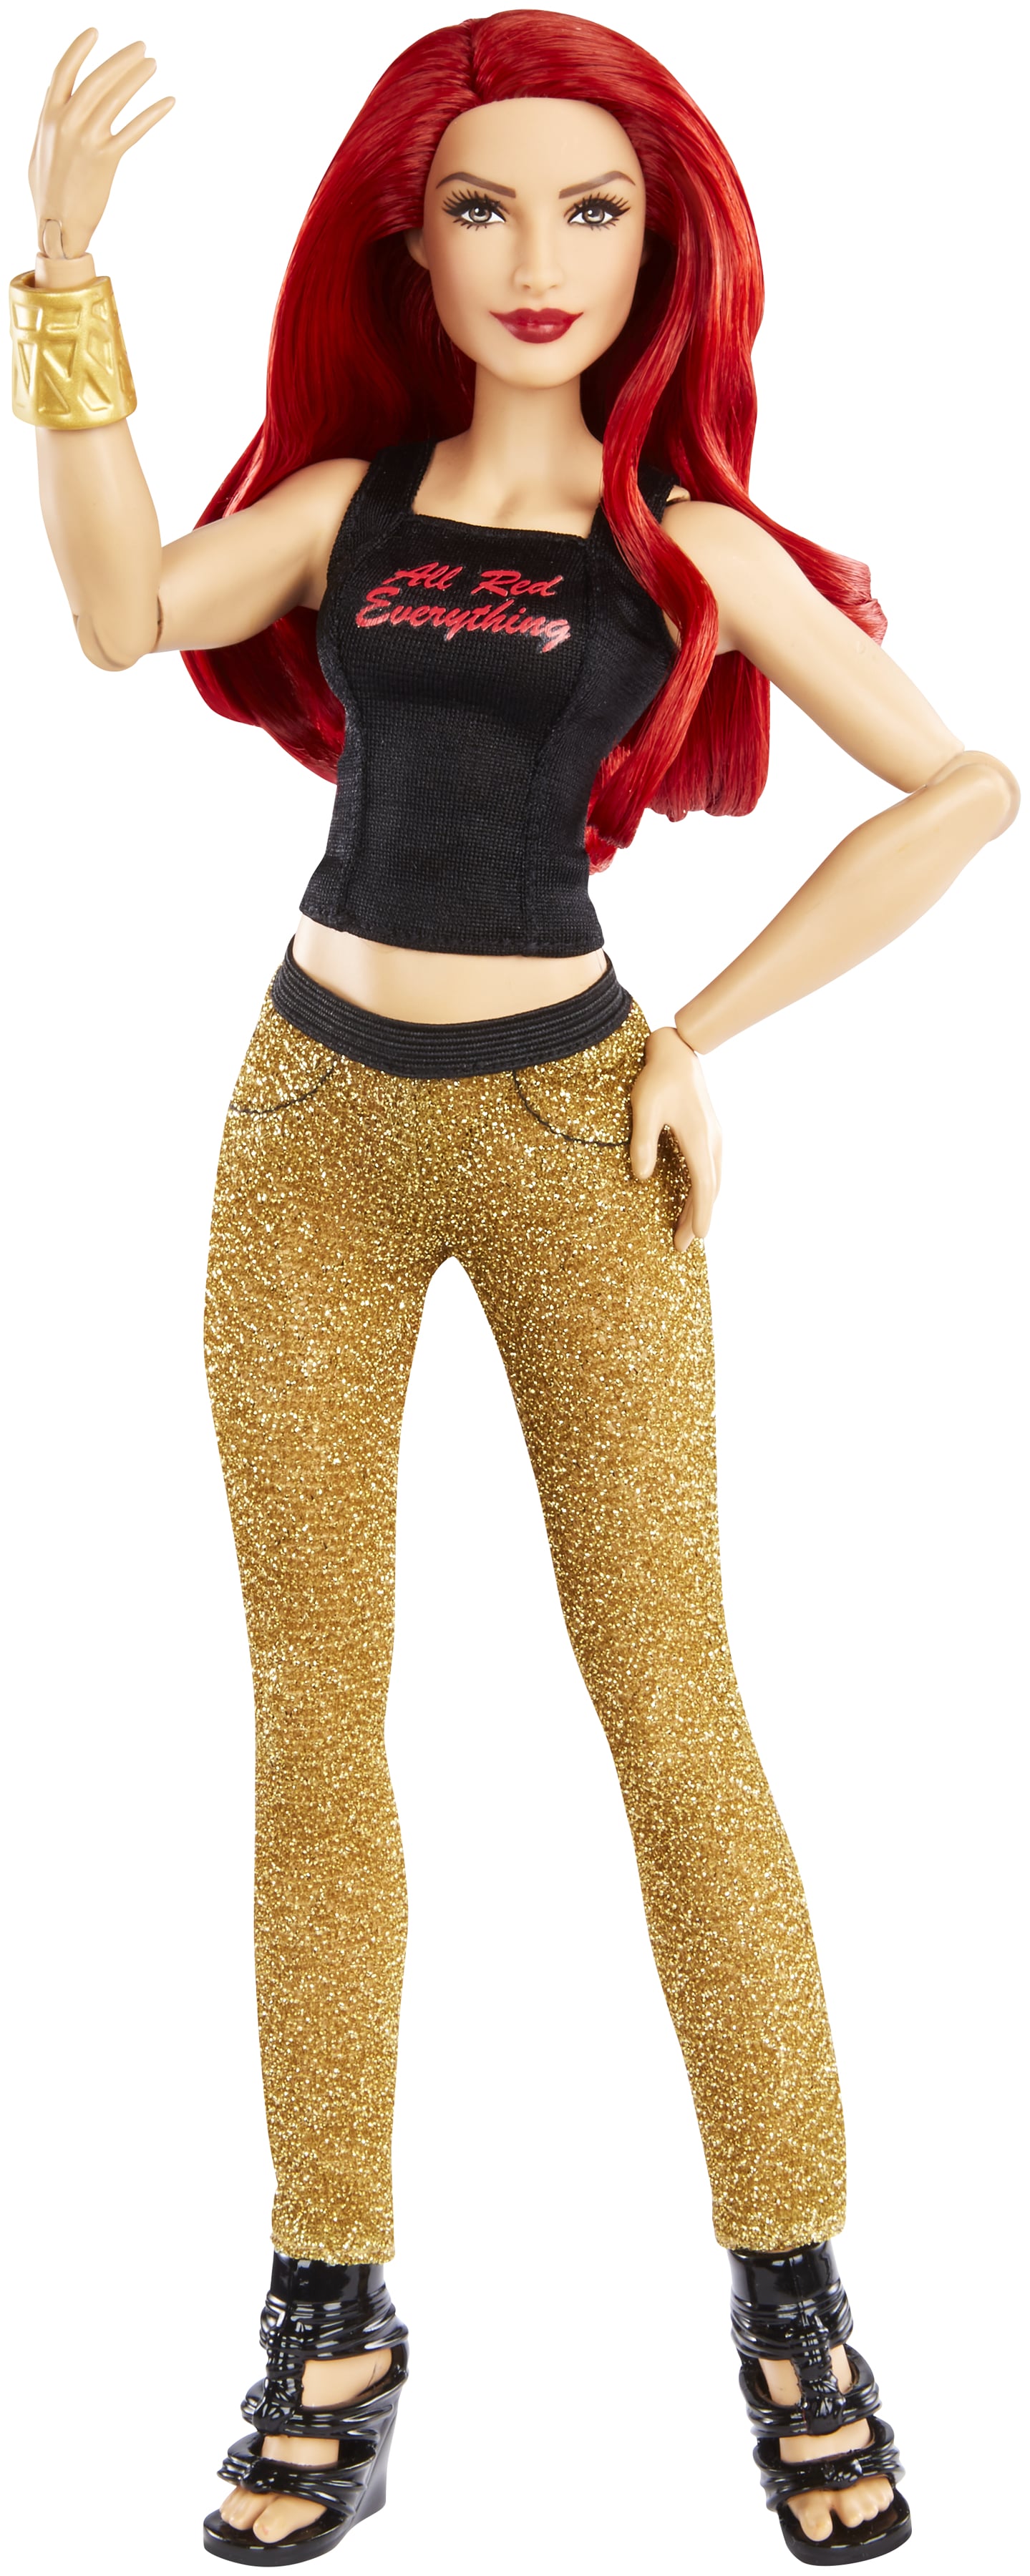 OFFICIAL WWE AUTHENTIC SUPERSTARS BECKY LYNCH FASHION DOLL 